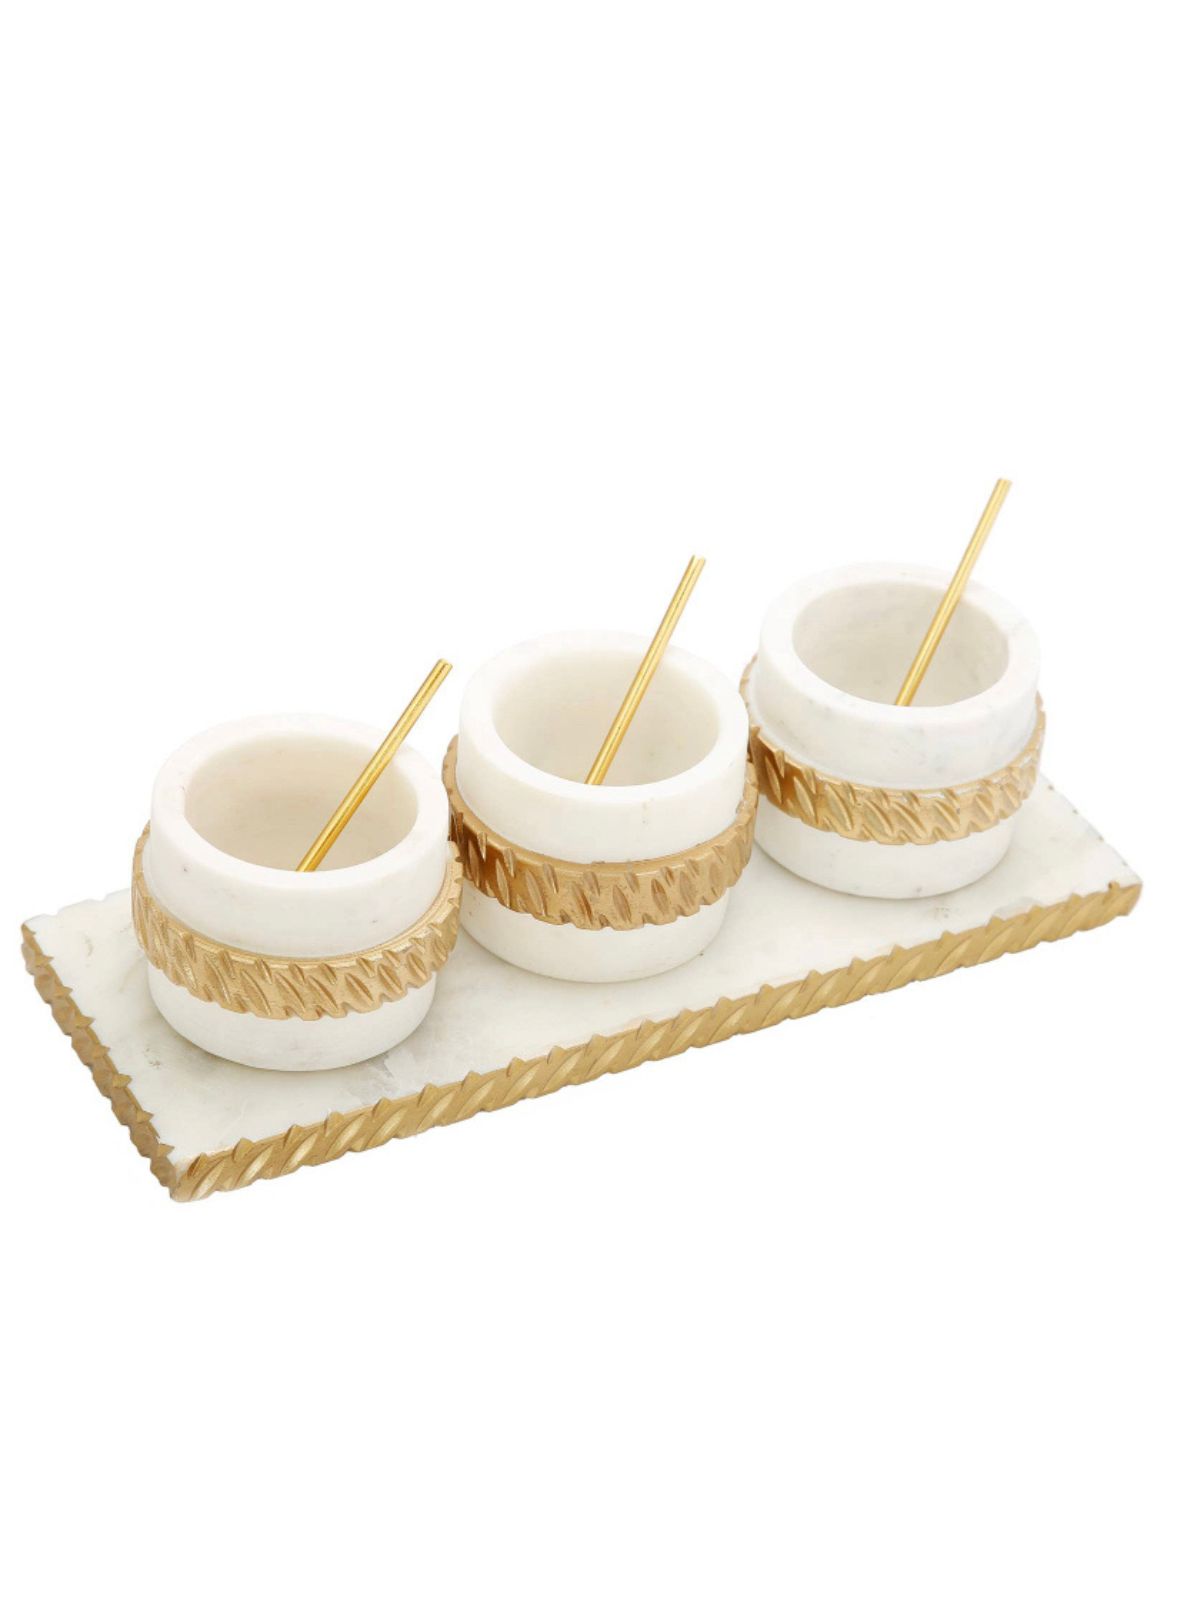 This marble 3-bowl and tray set is perfect for serving snacks, nuts, chocolate, spices or even dips in a glamorous way. 